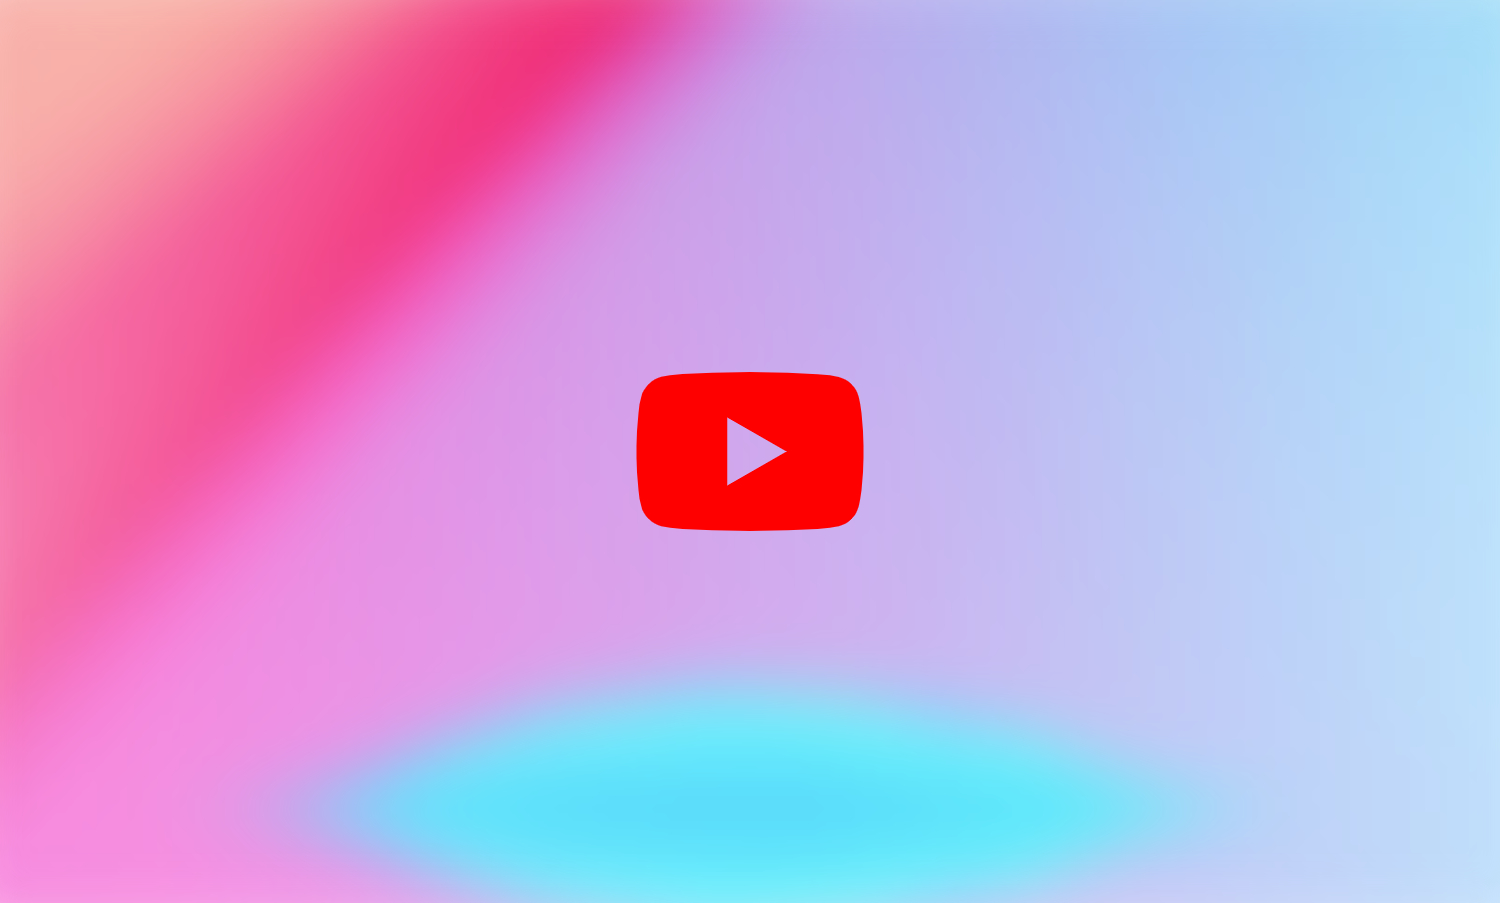 A gradient with a waveform on it, with the YouTube logo in the center